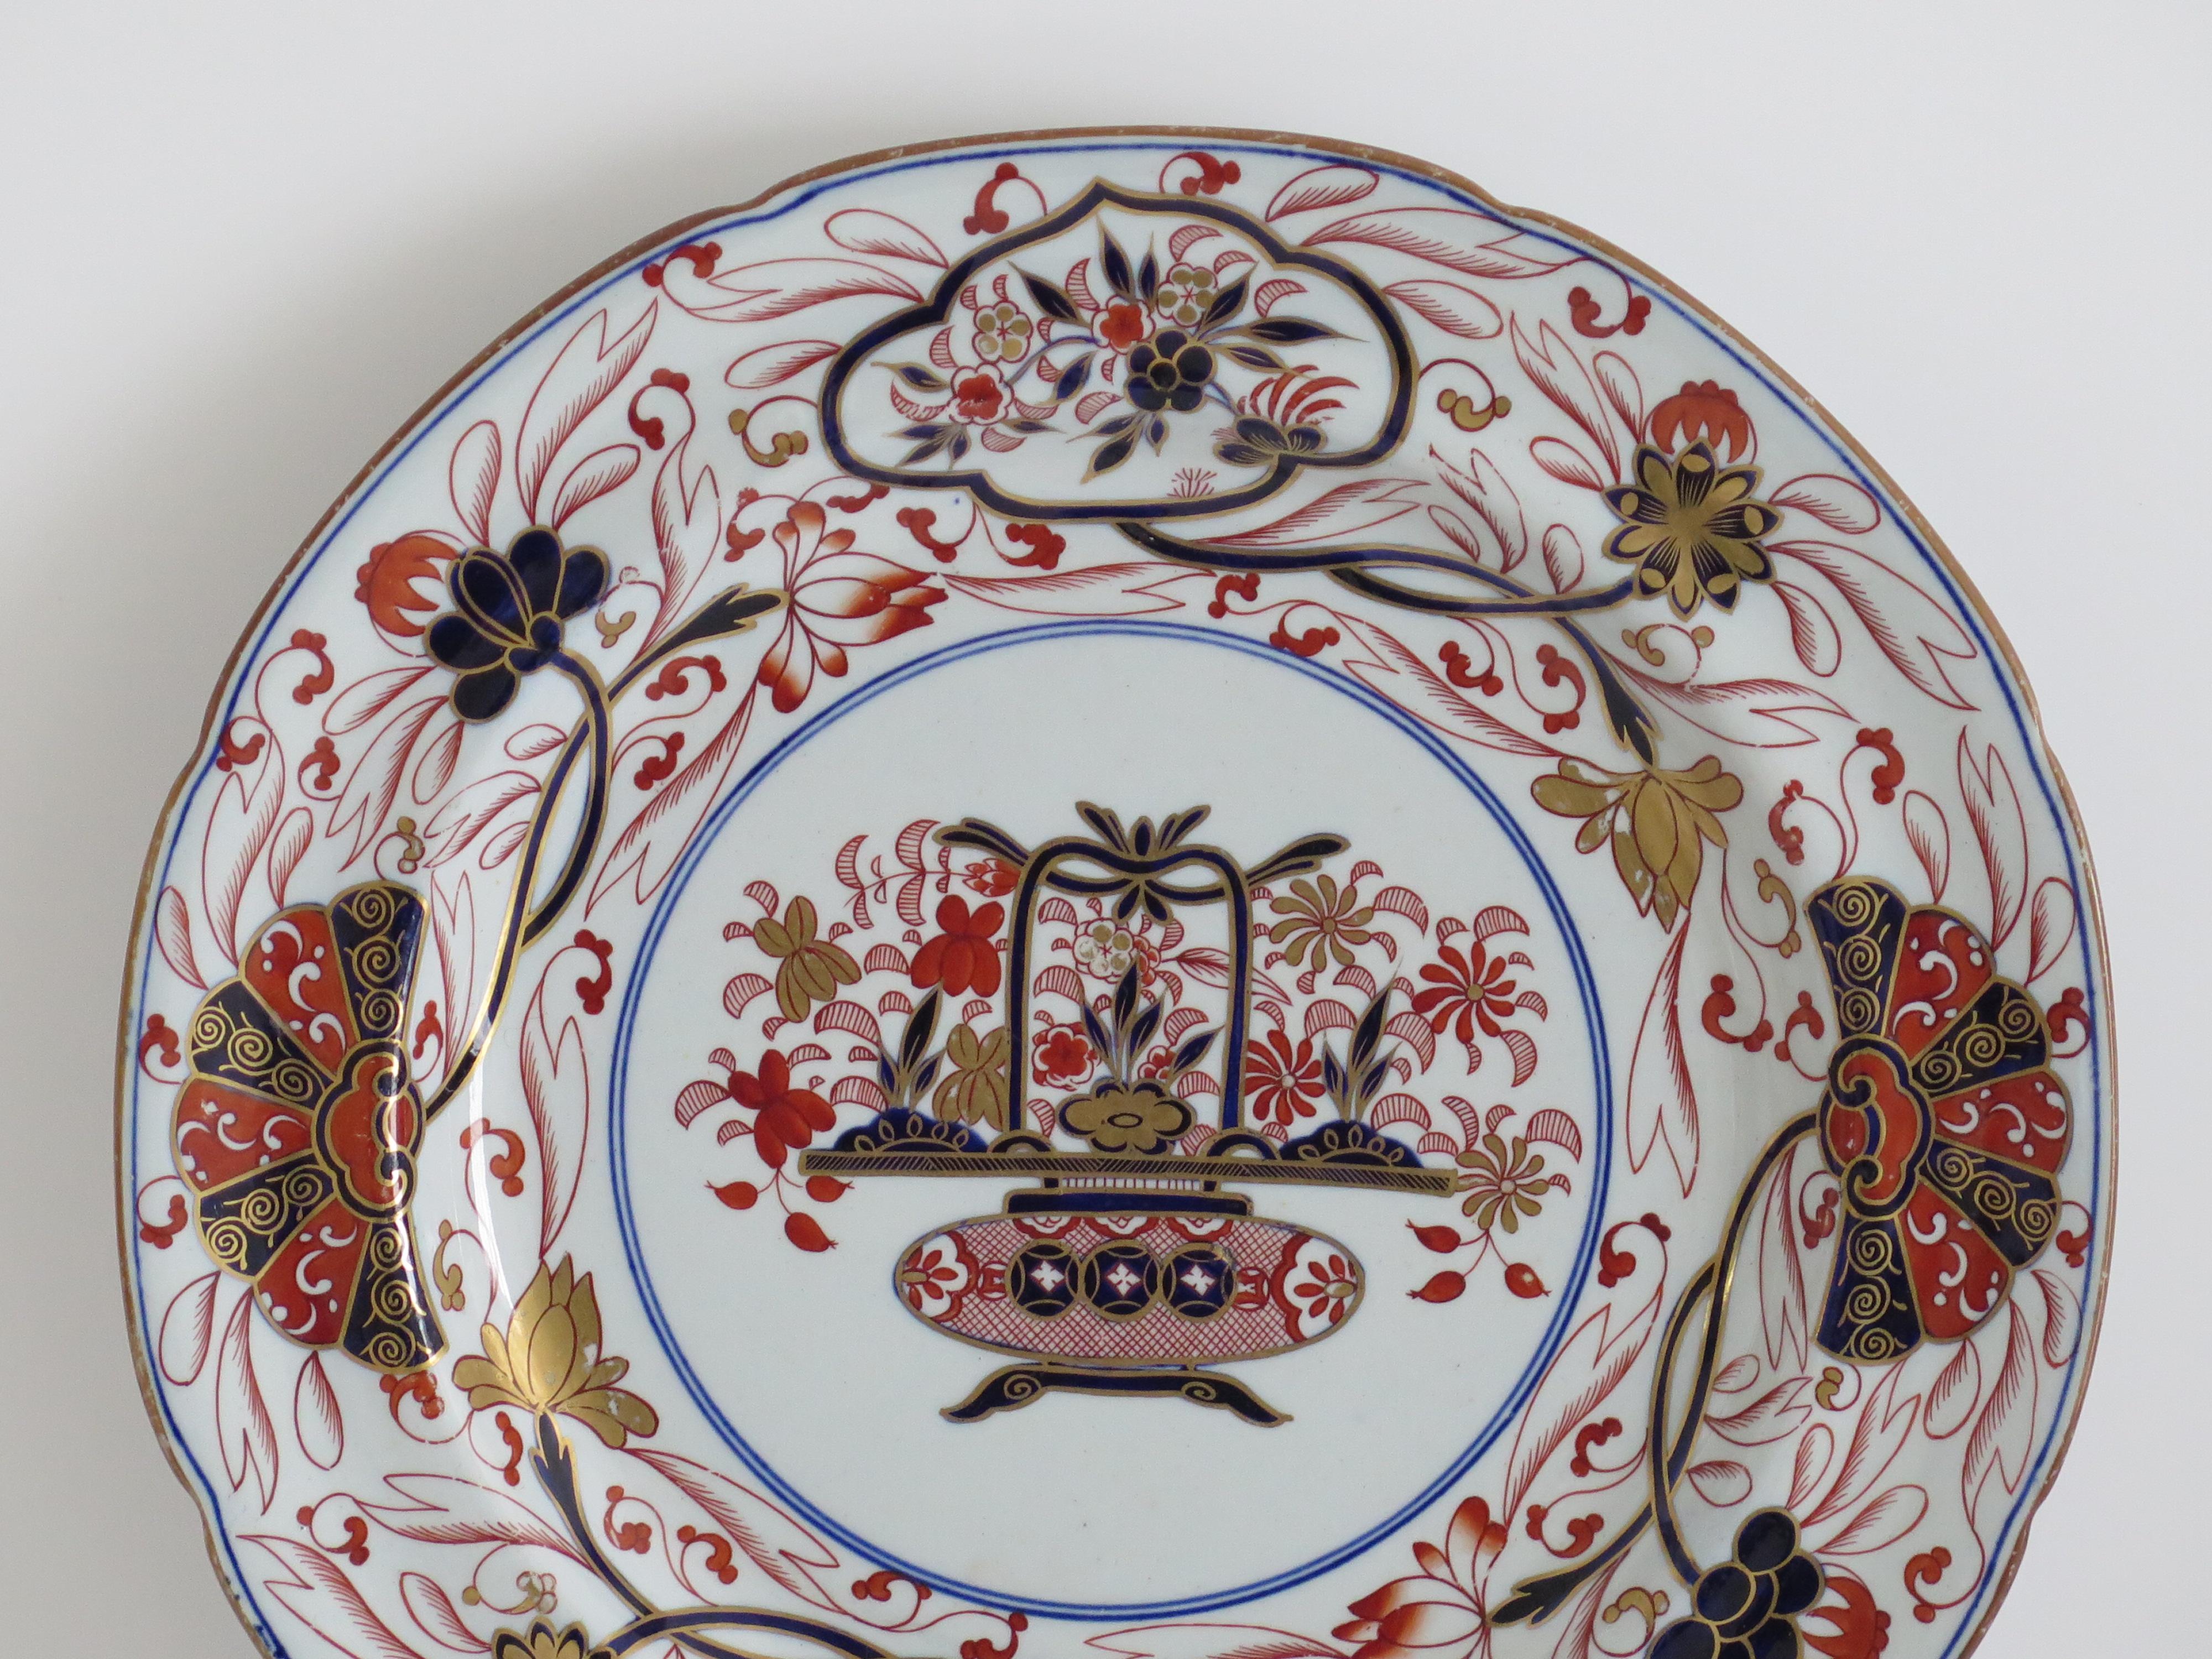 This is a very beautiful hand painted dinner plate, produced by the Spode factory in the late Georgian period, Circa 1820.

This is pattern number 2283, the chinoiserie decoration being carefully and beautifully hand-painted in bold colored